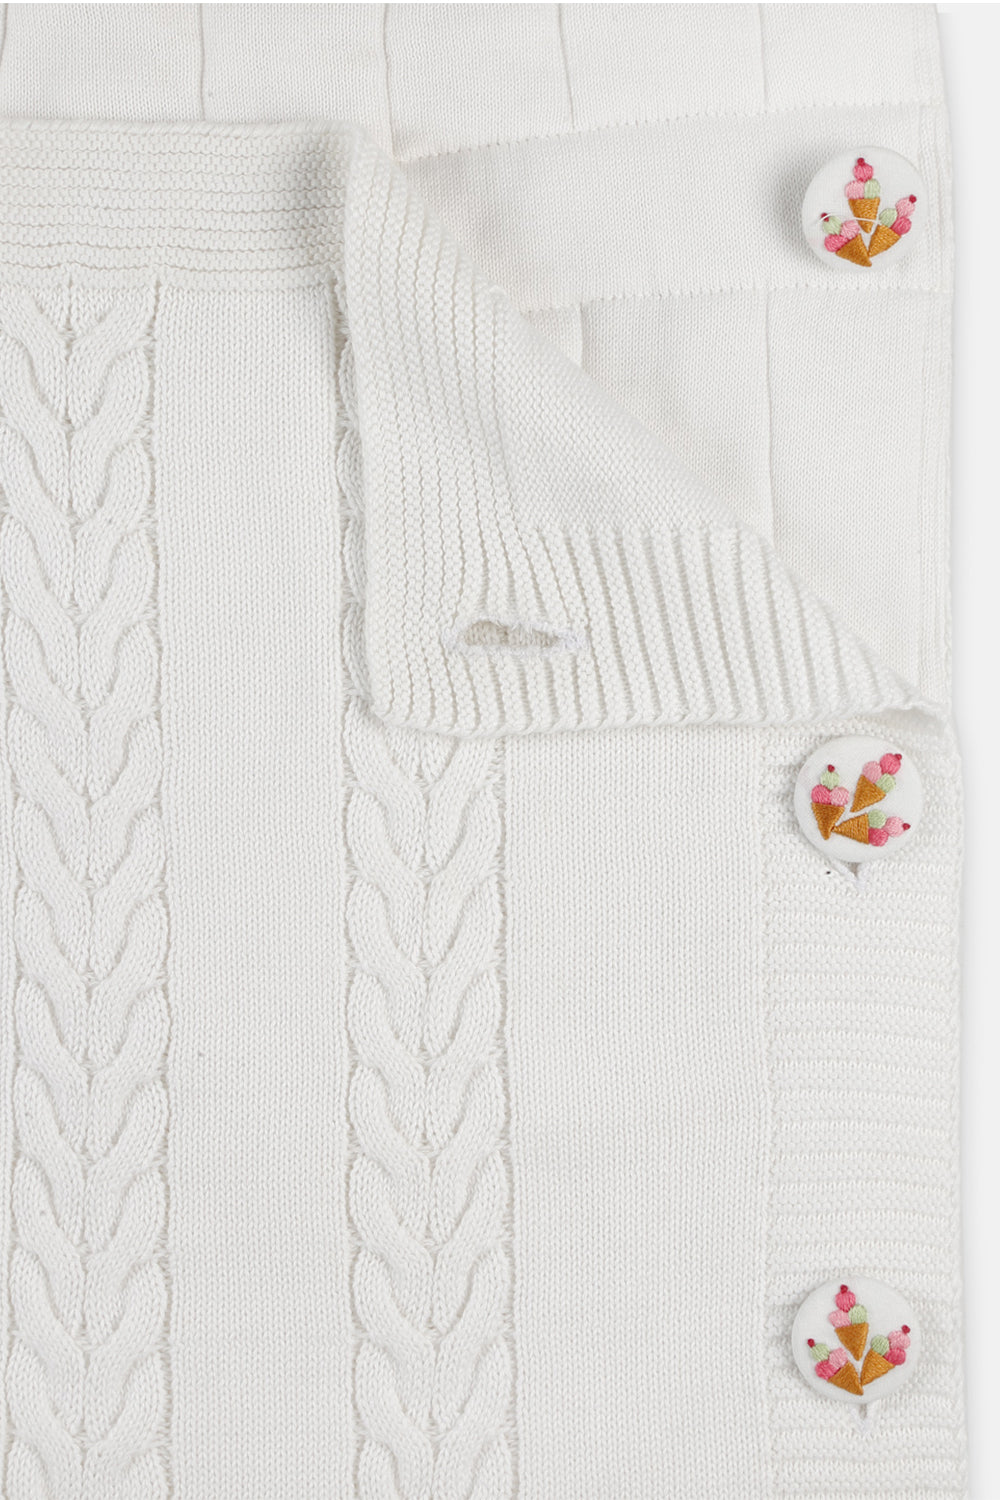 Knitted Baby Sleeping Bag with Embroidered Tree Button